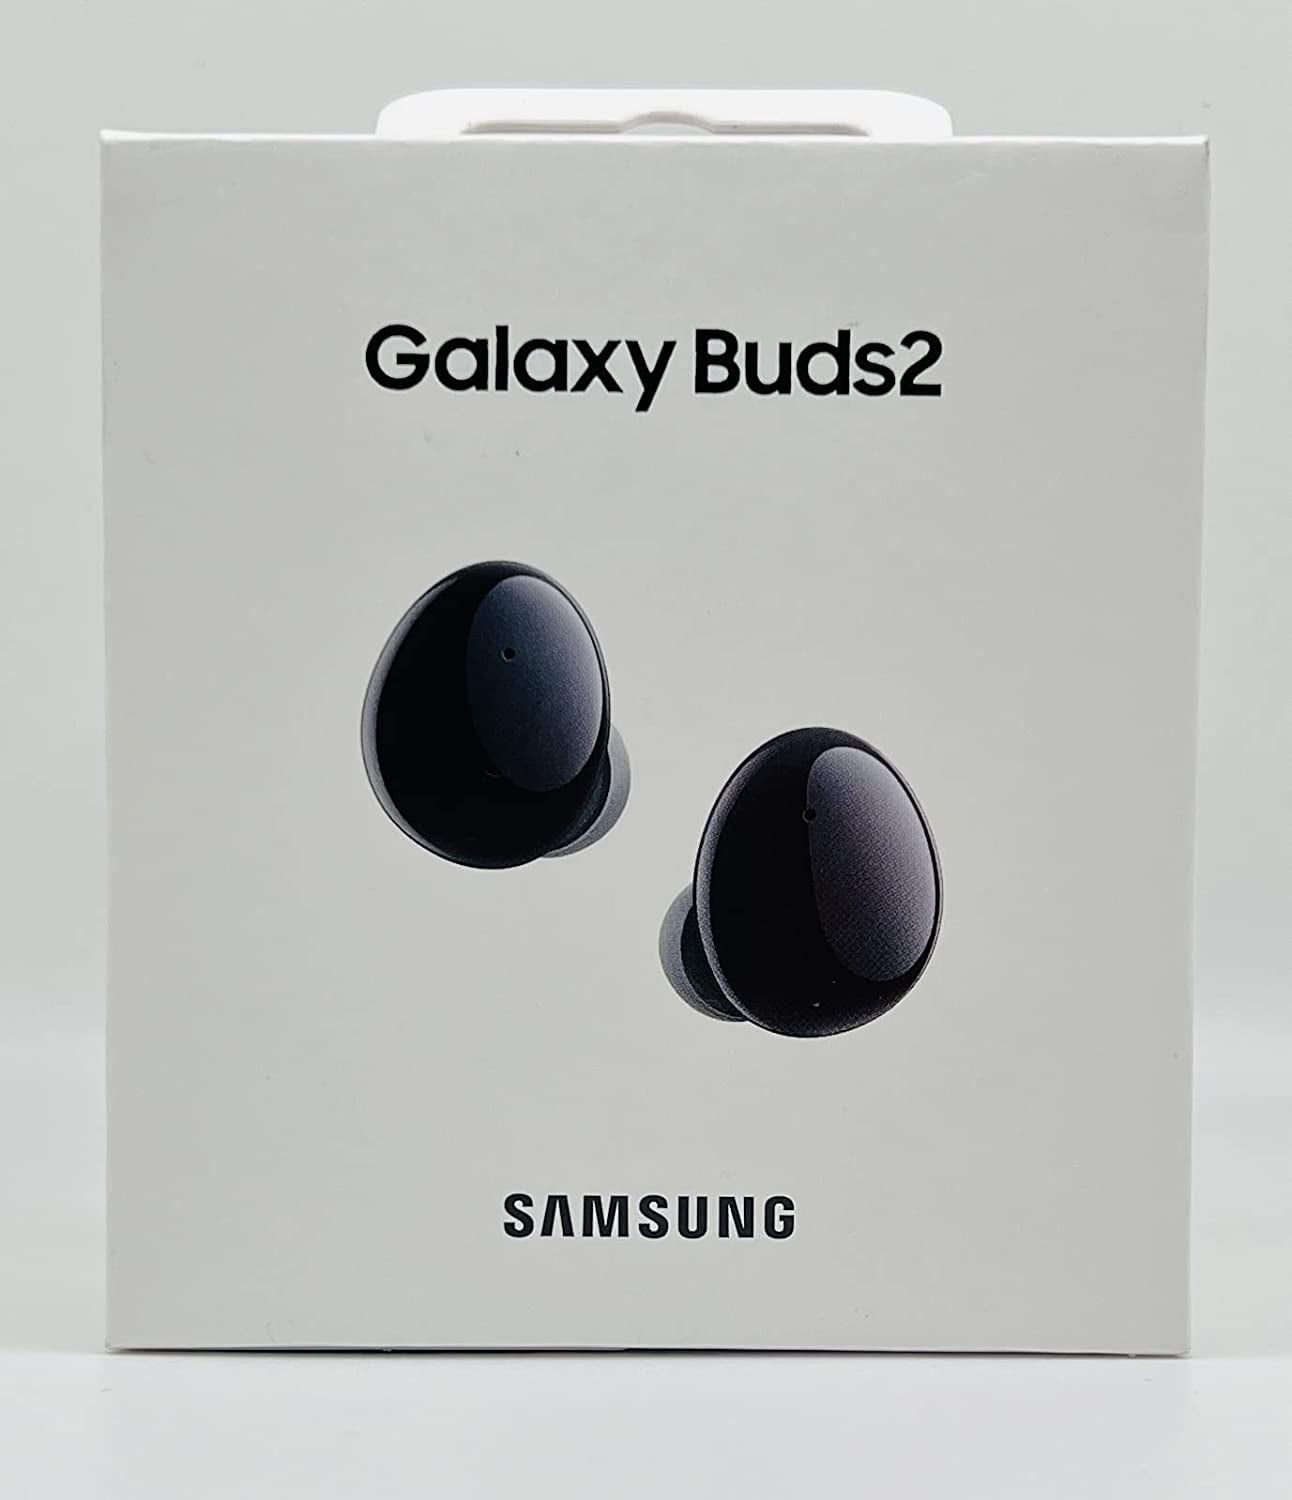 Samsung Galaxy Buds2 True Wireless Earbuds Noise Cancelling Ambient